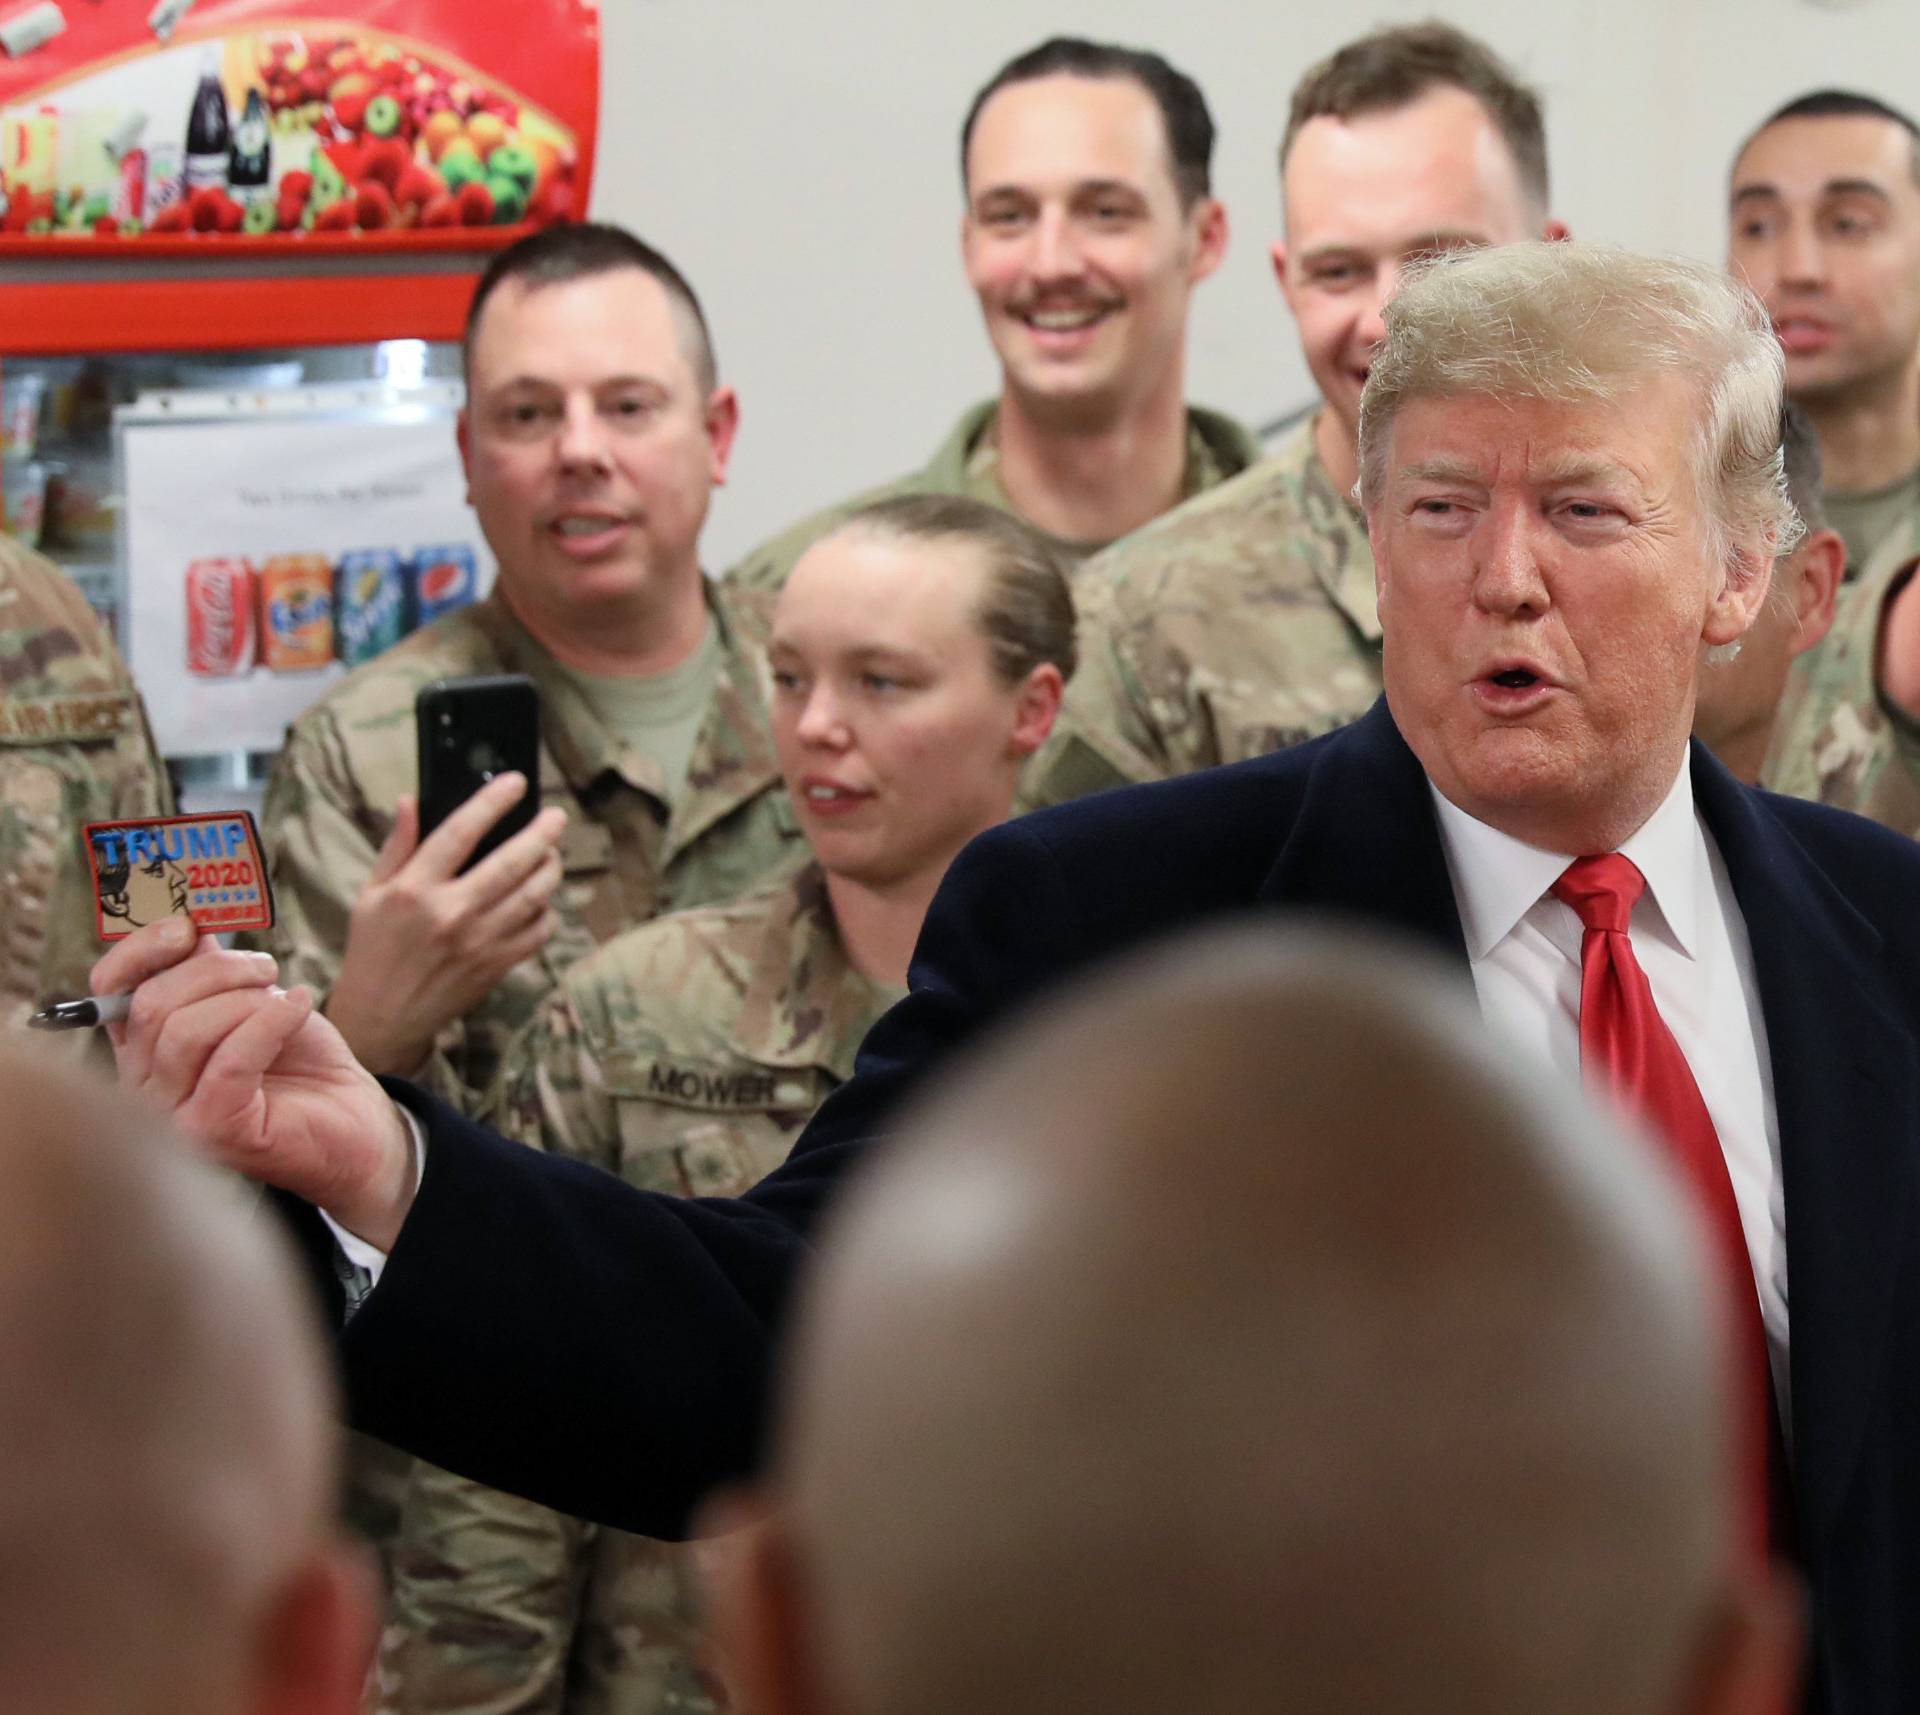 U.S. President Trump holds up a "Trump 2020" patch as he greets military personnel during an unannounced visit to Al Asad Air Base